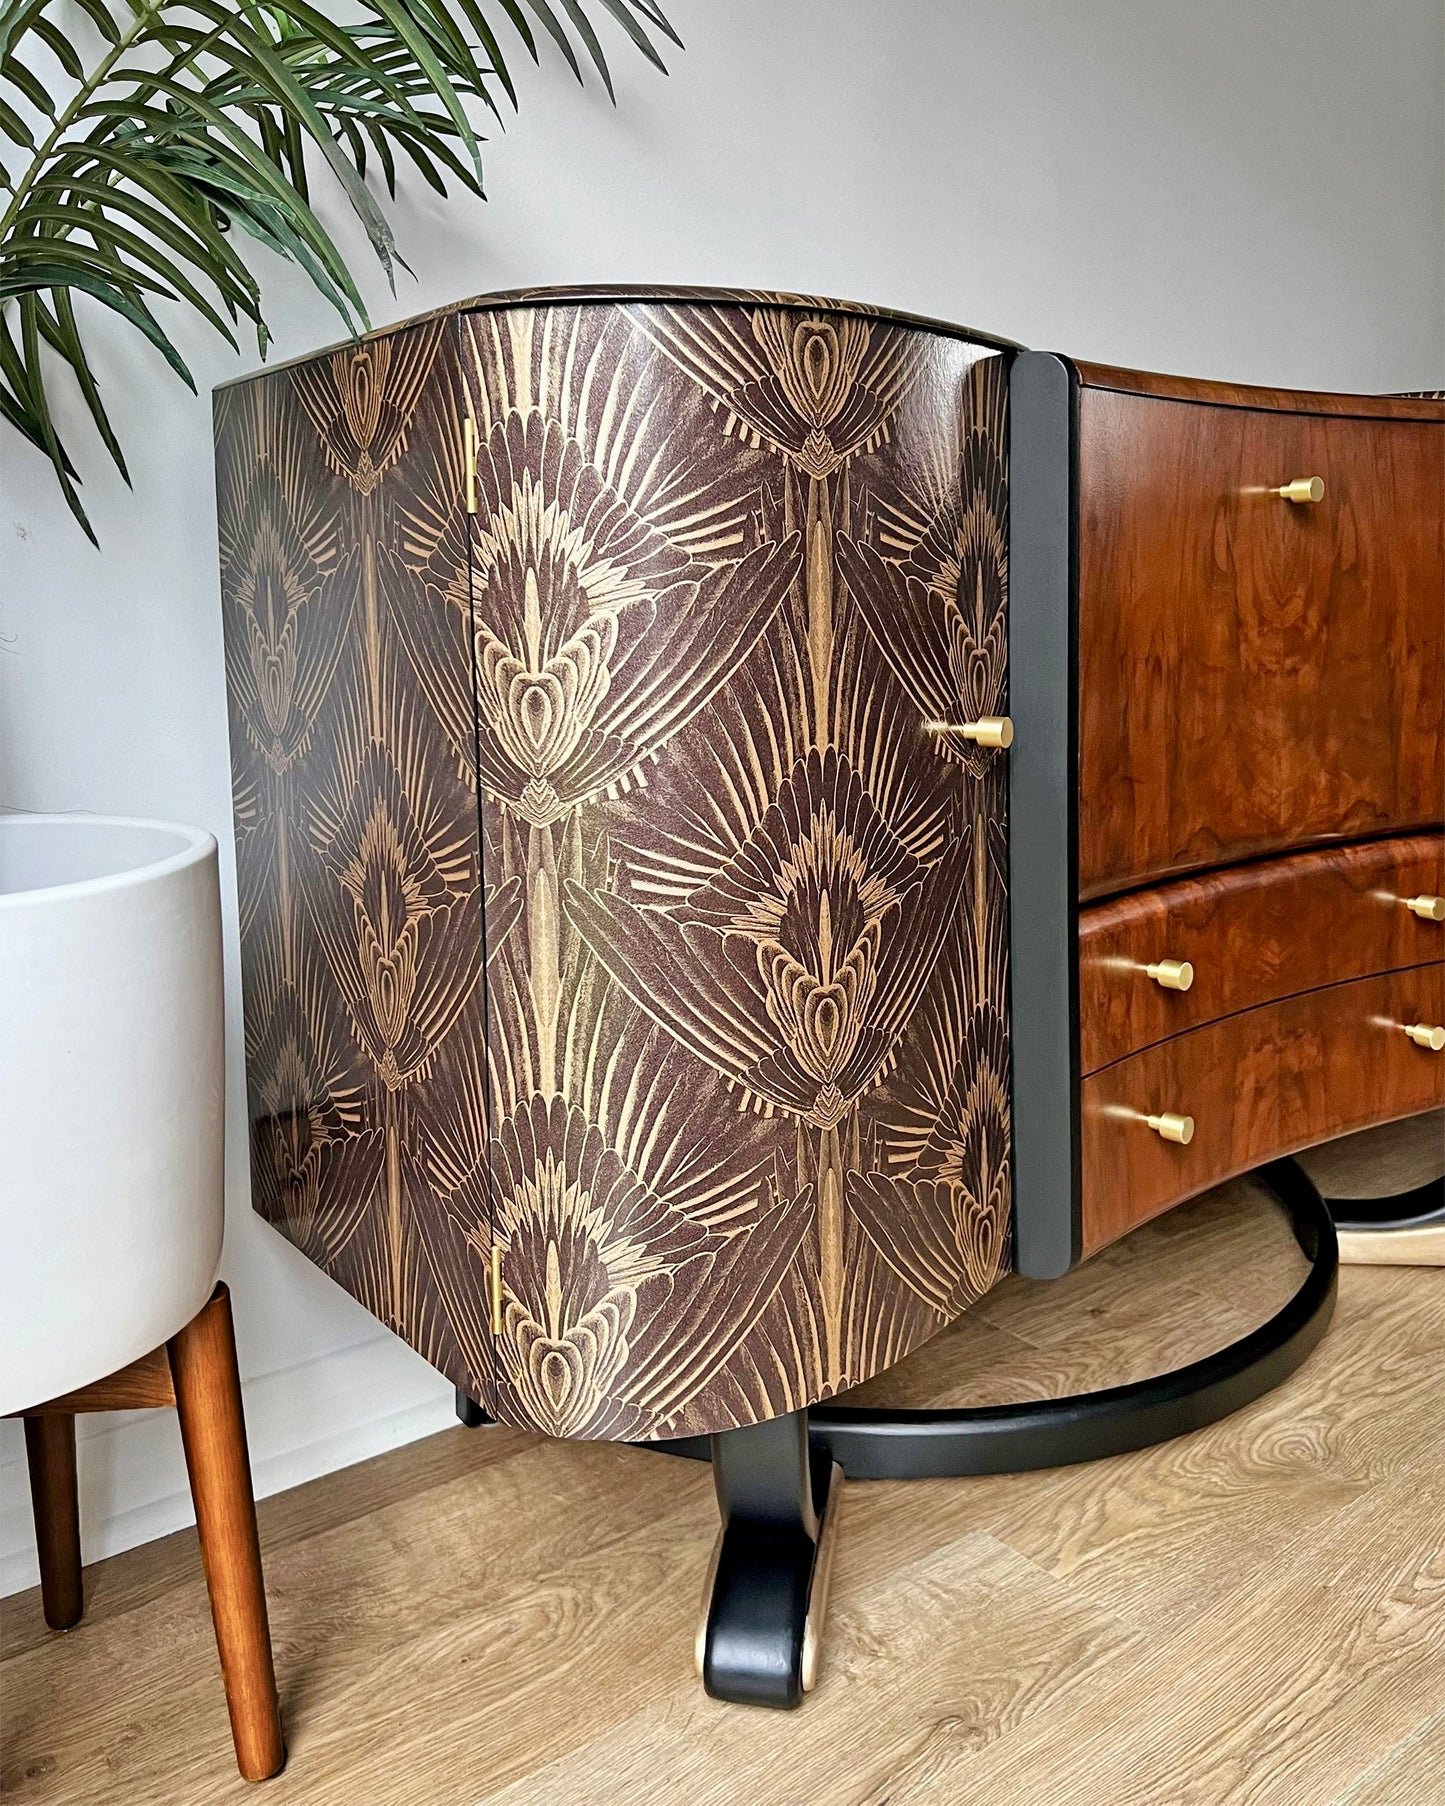 1920s Style Art Deco Beautility Walnut Sideboard Cocktail Cabinet - Black & Gold